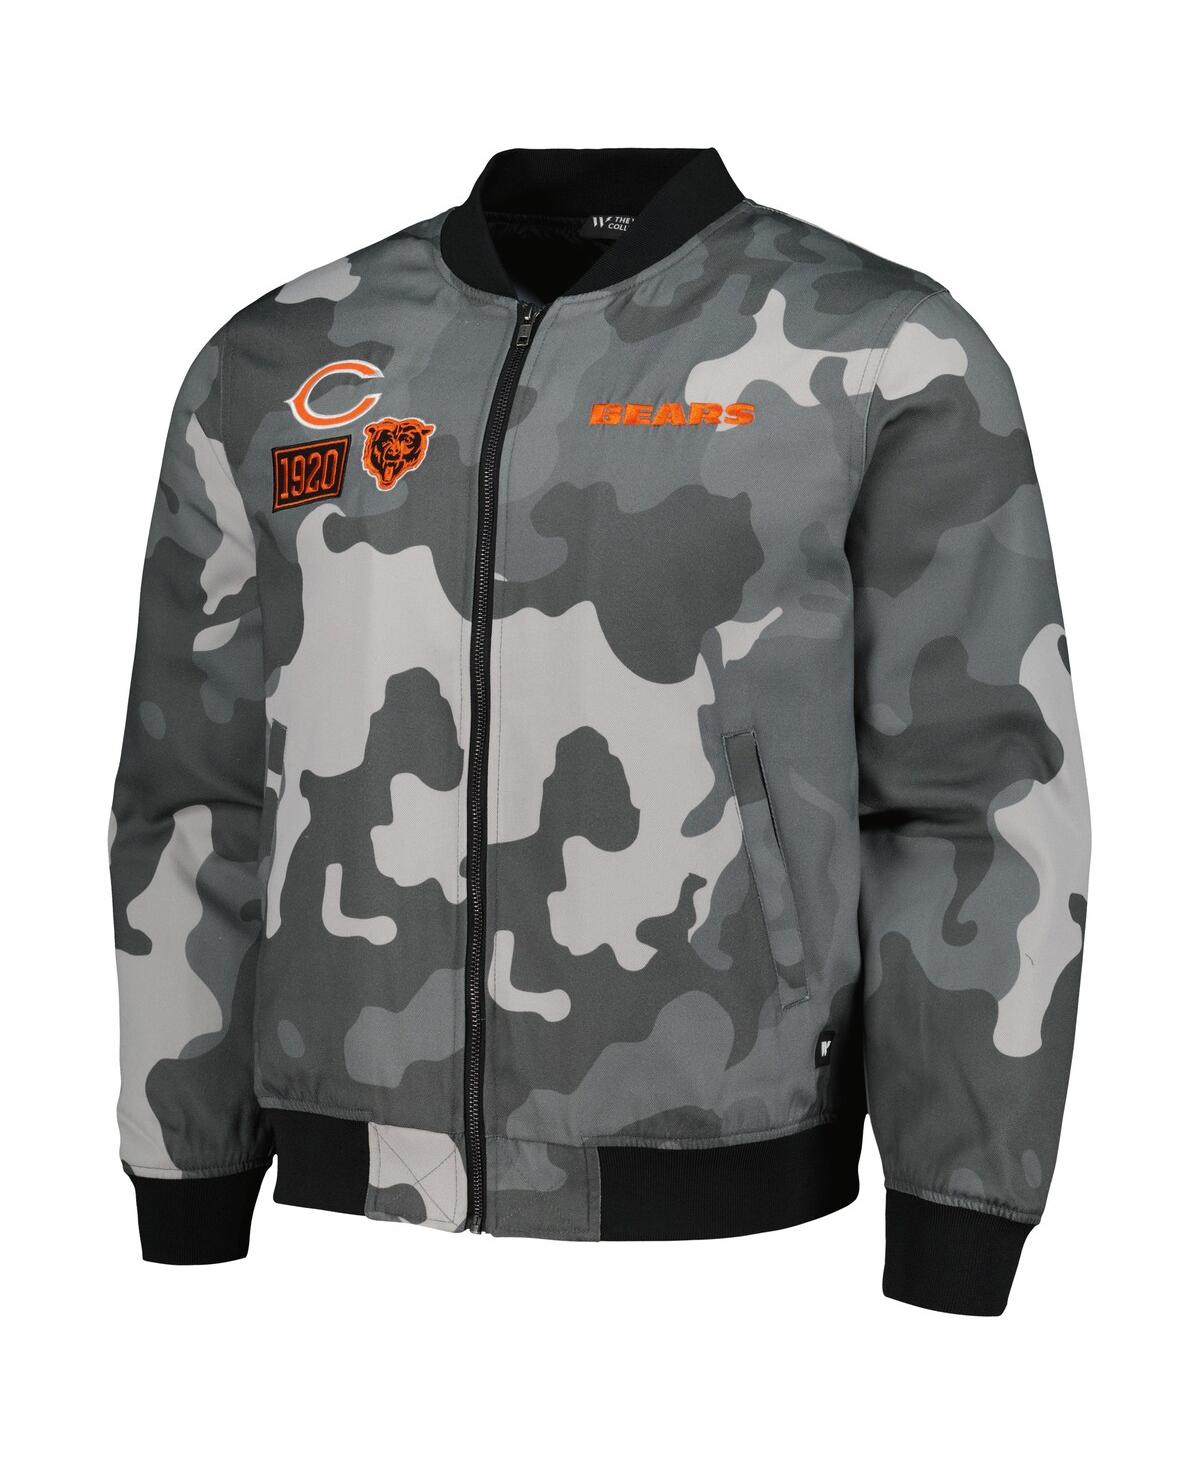 Shop The Wild Collective Men's And Women's  Gray Distressed Chicago Bears Camo Bomber Jacket